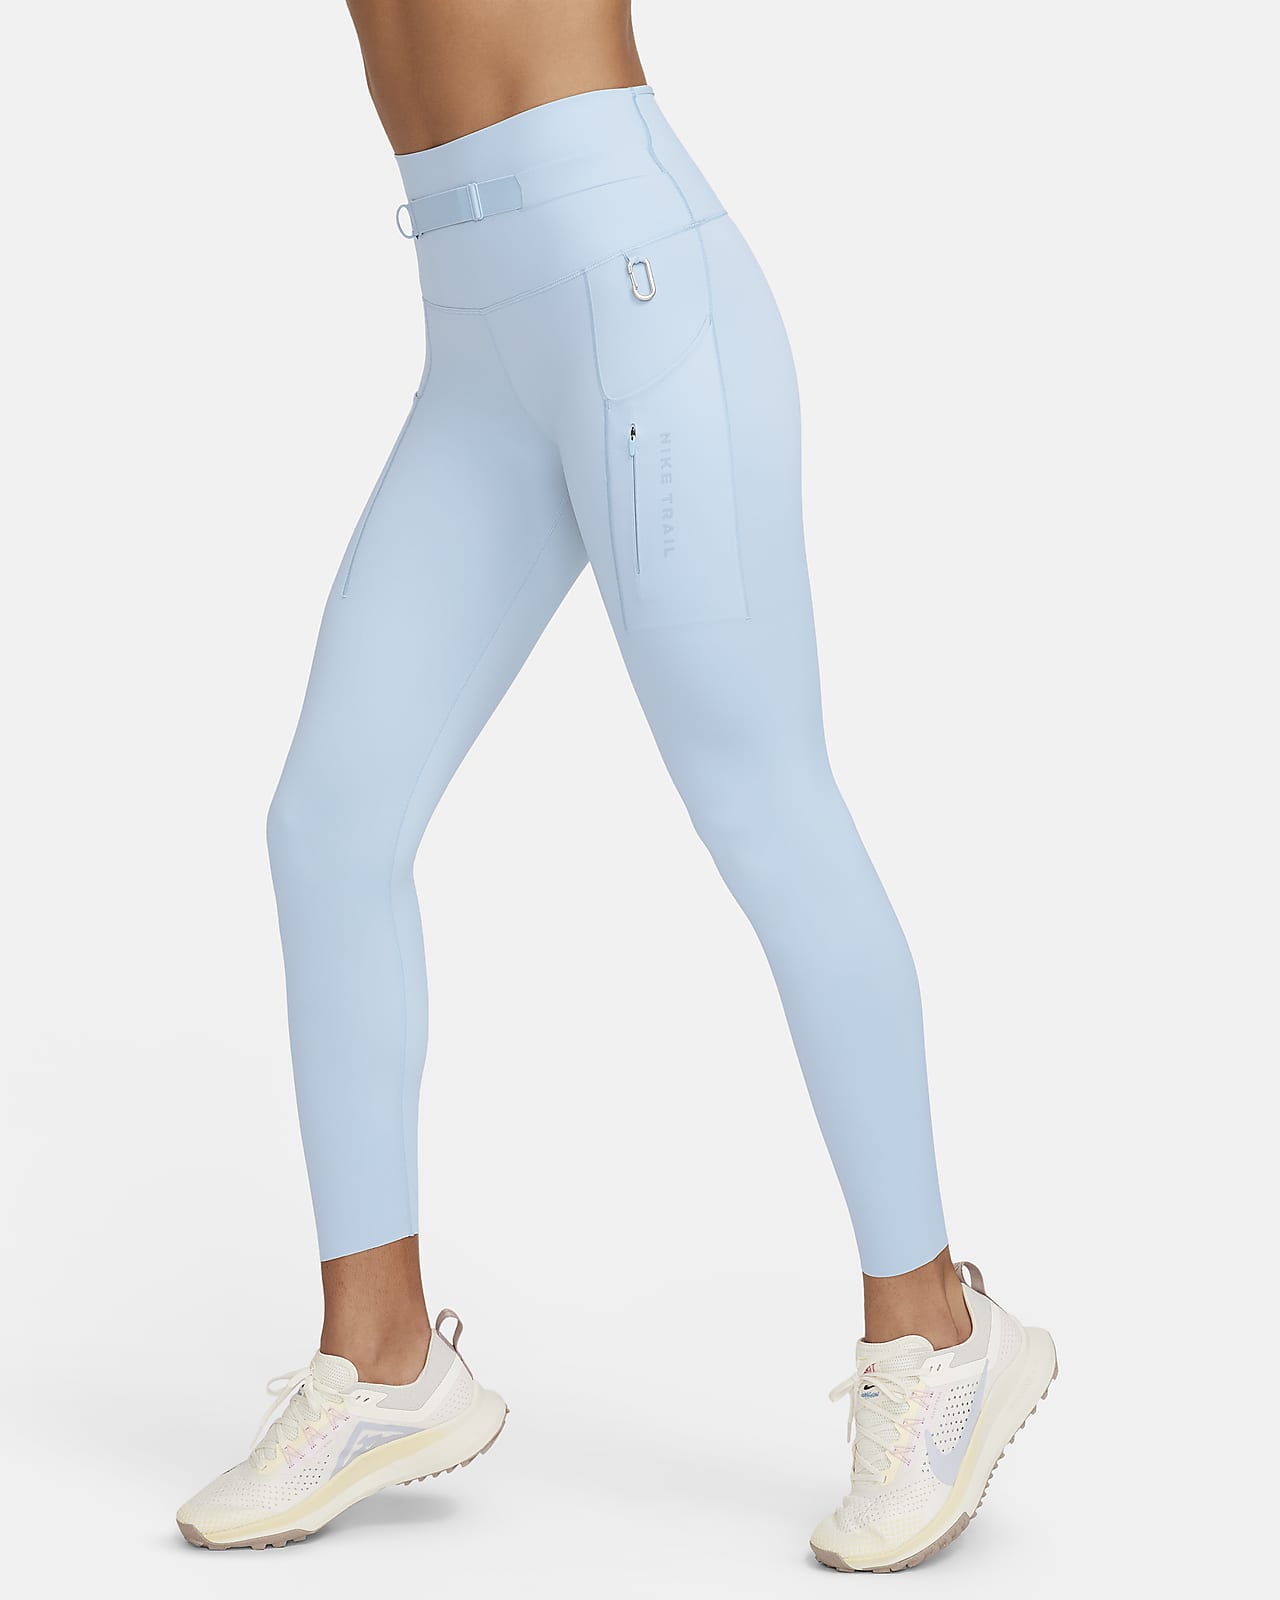 High-Rise Mesh Legging with Pockets Pacific Blue / S